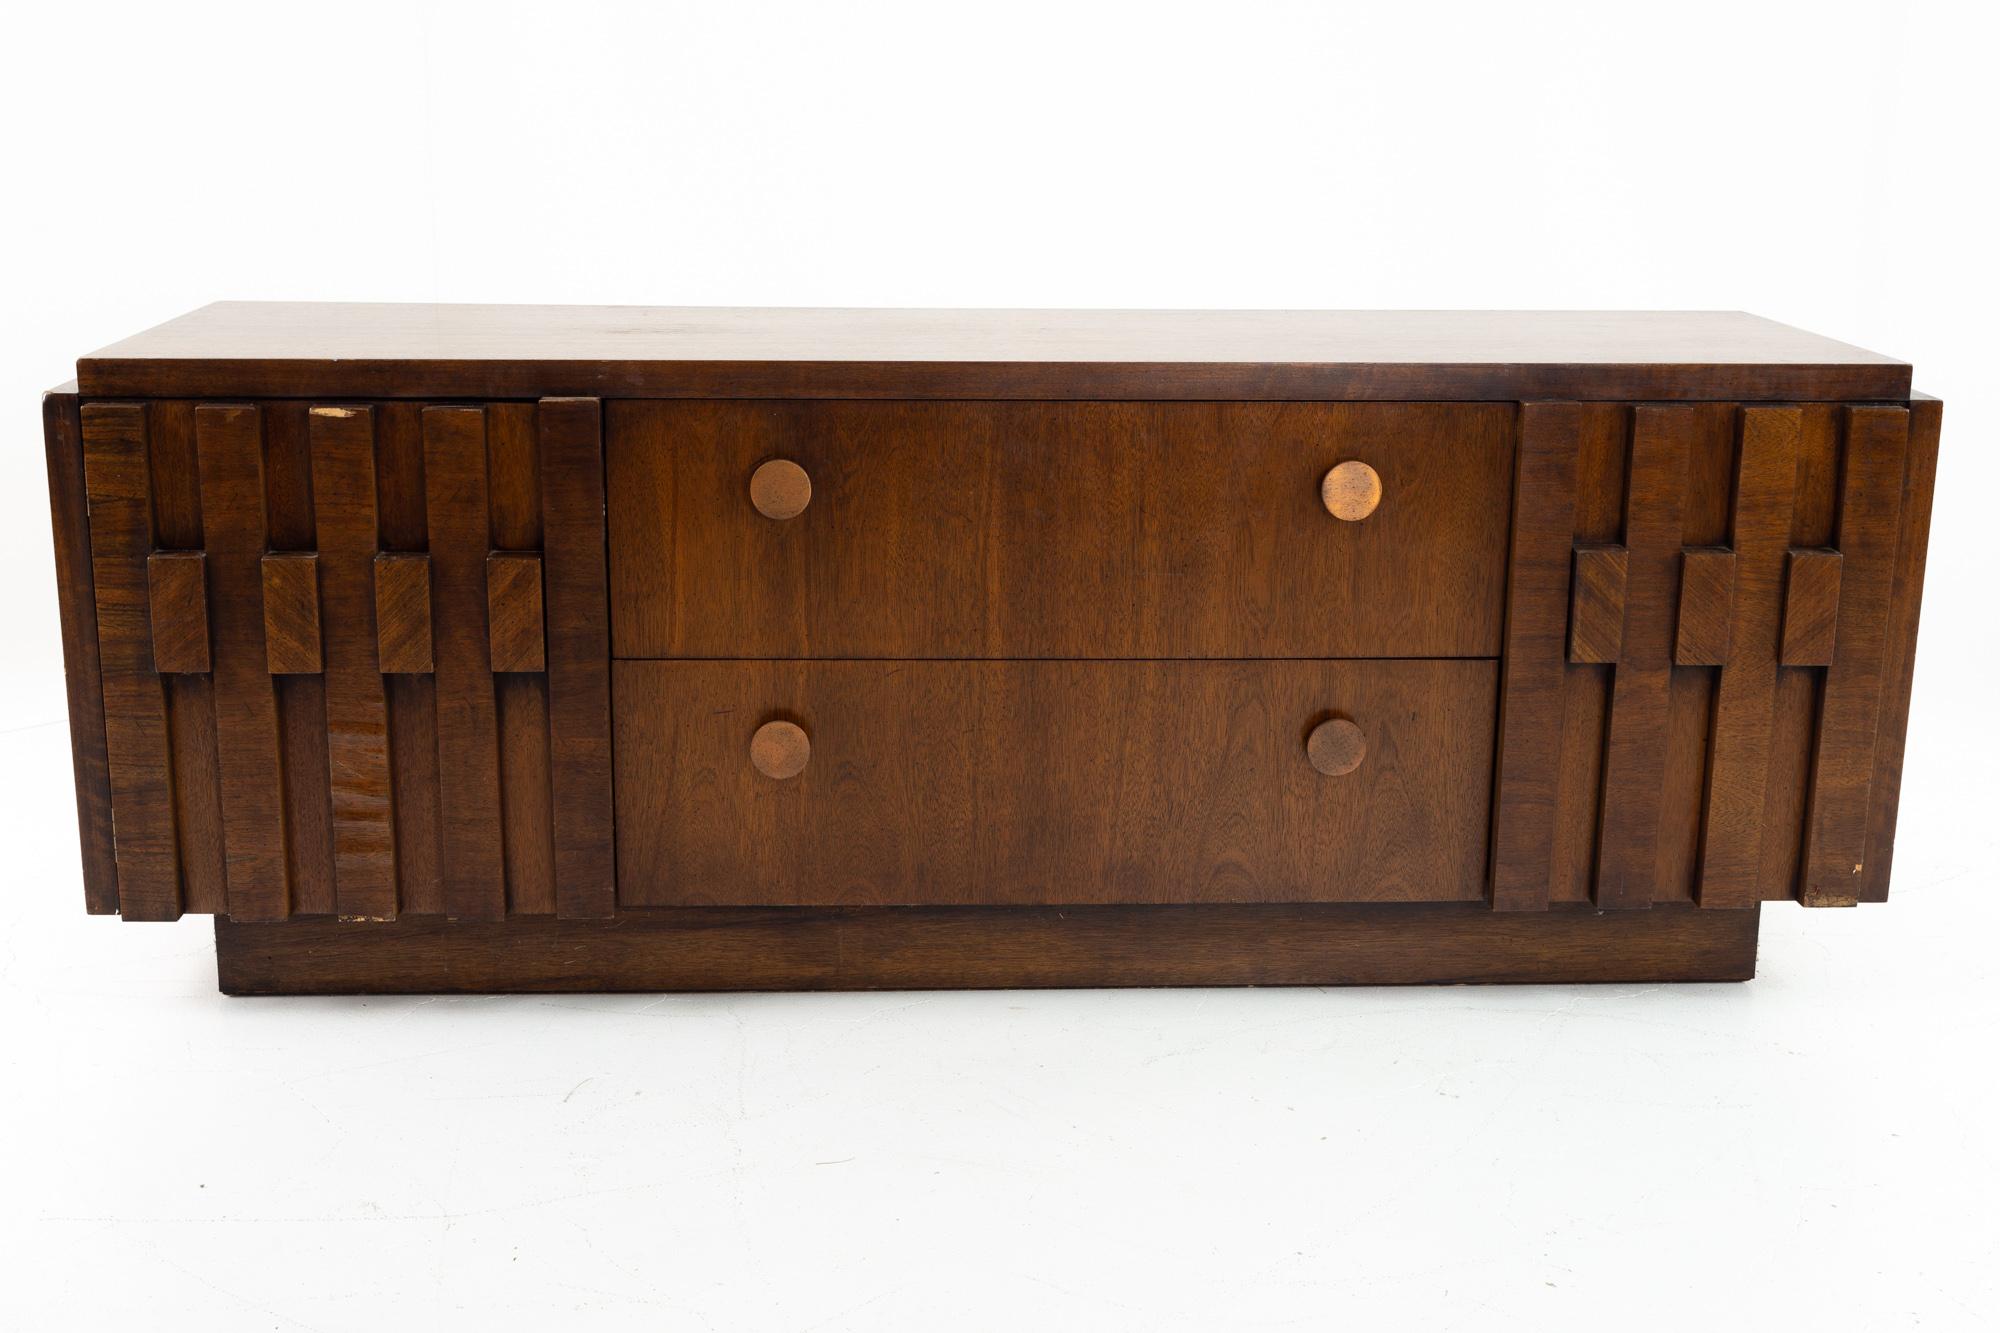 Lane Brutalist mid century low profile credenza
Measures: 66 wide x 19.25 deep x 24.25 high

All pieces of furniture can be had in what we call restored vintage condition. That means the piece is restored upon purchase so it’s free of watermarks,